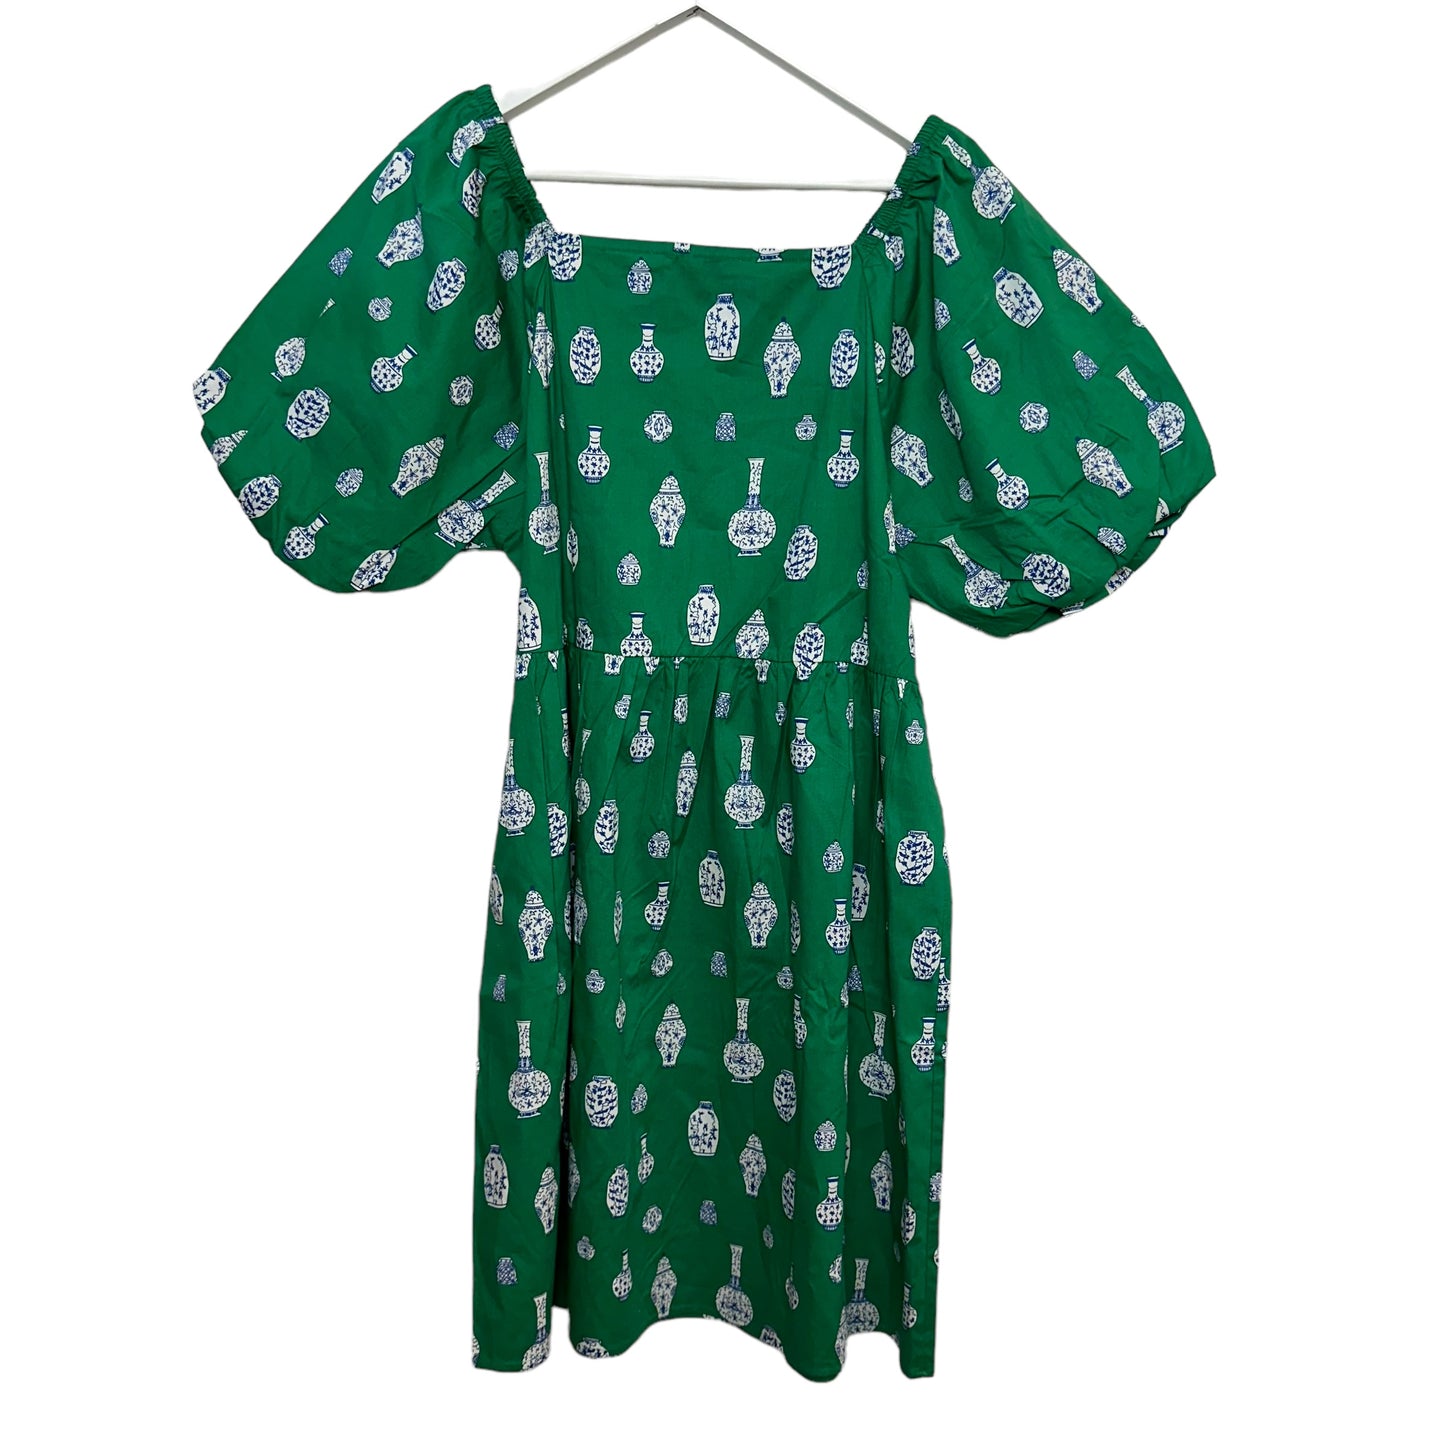 New with Tags Michelle Mcdowell Ginger Jar Iris Dress Green Blue Large